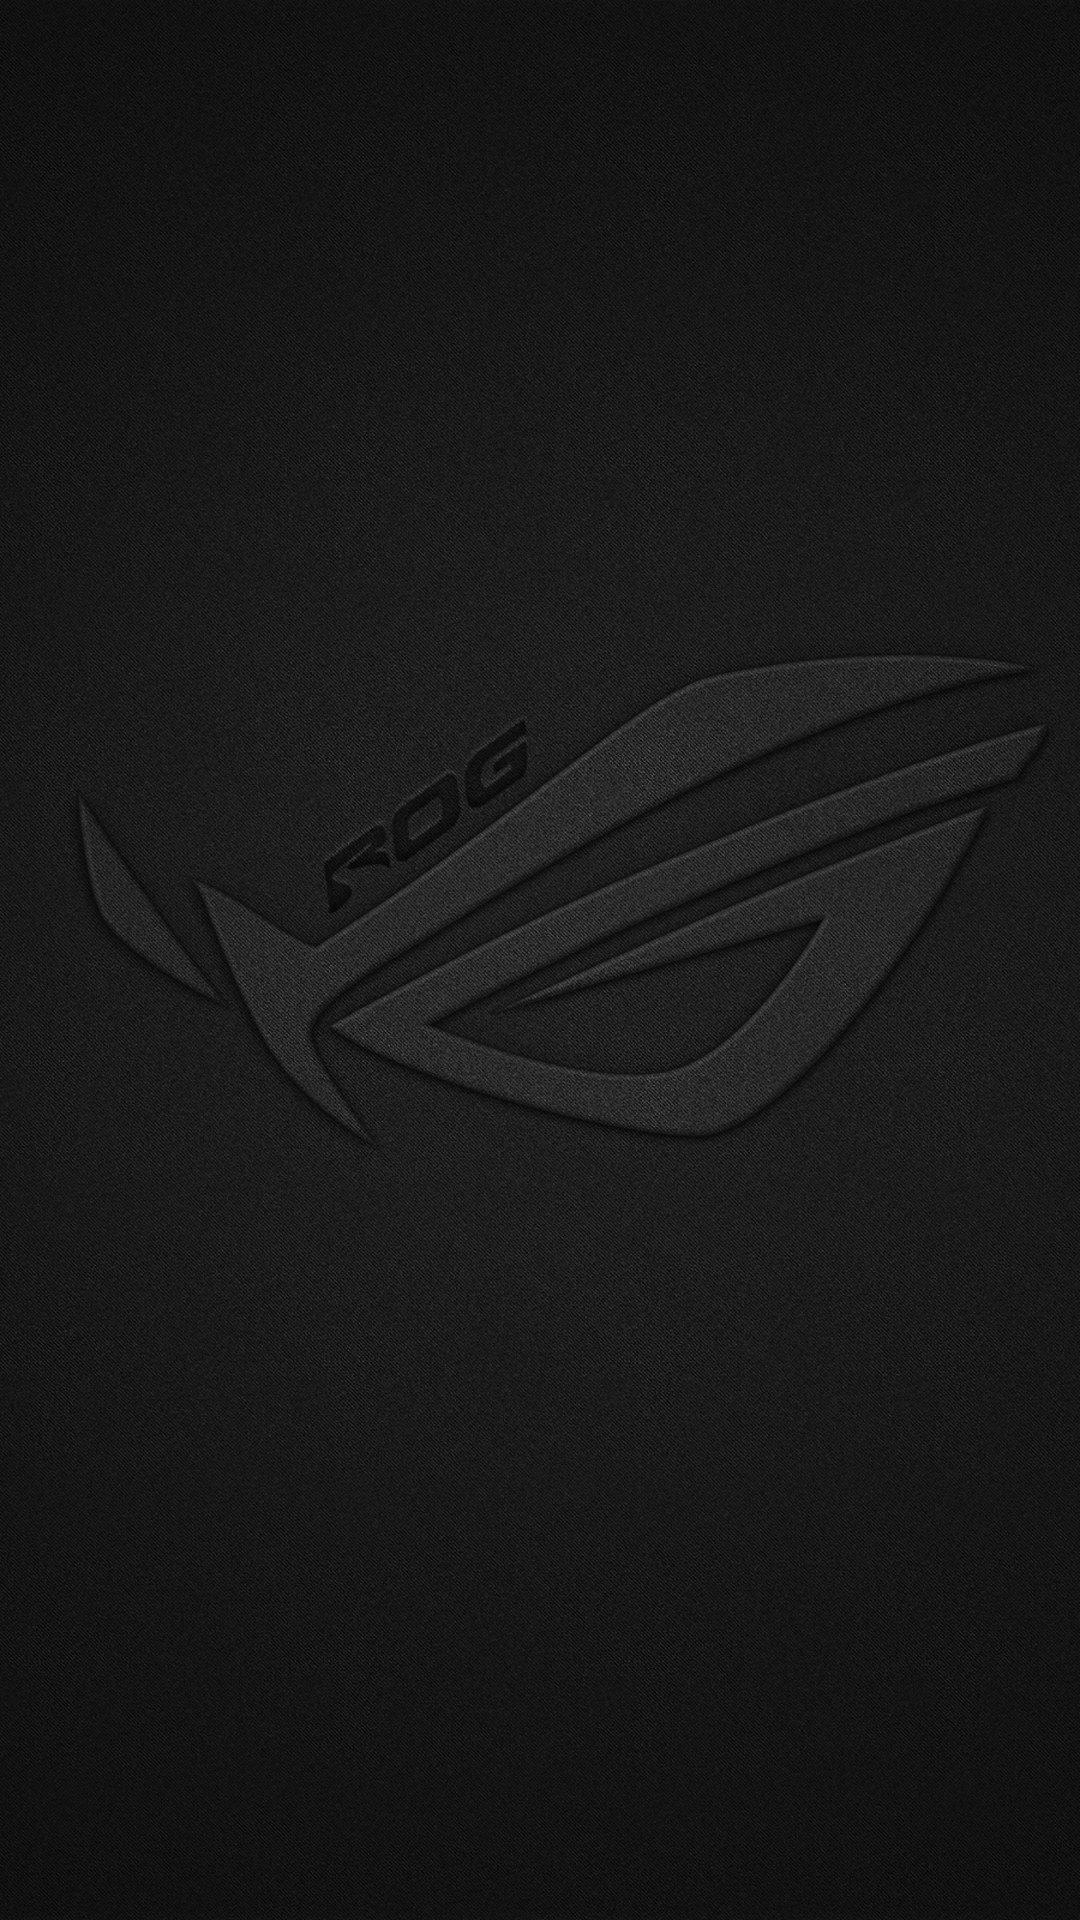 Phone Rog Wallpaper Android